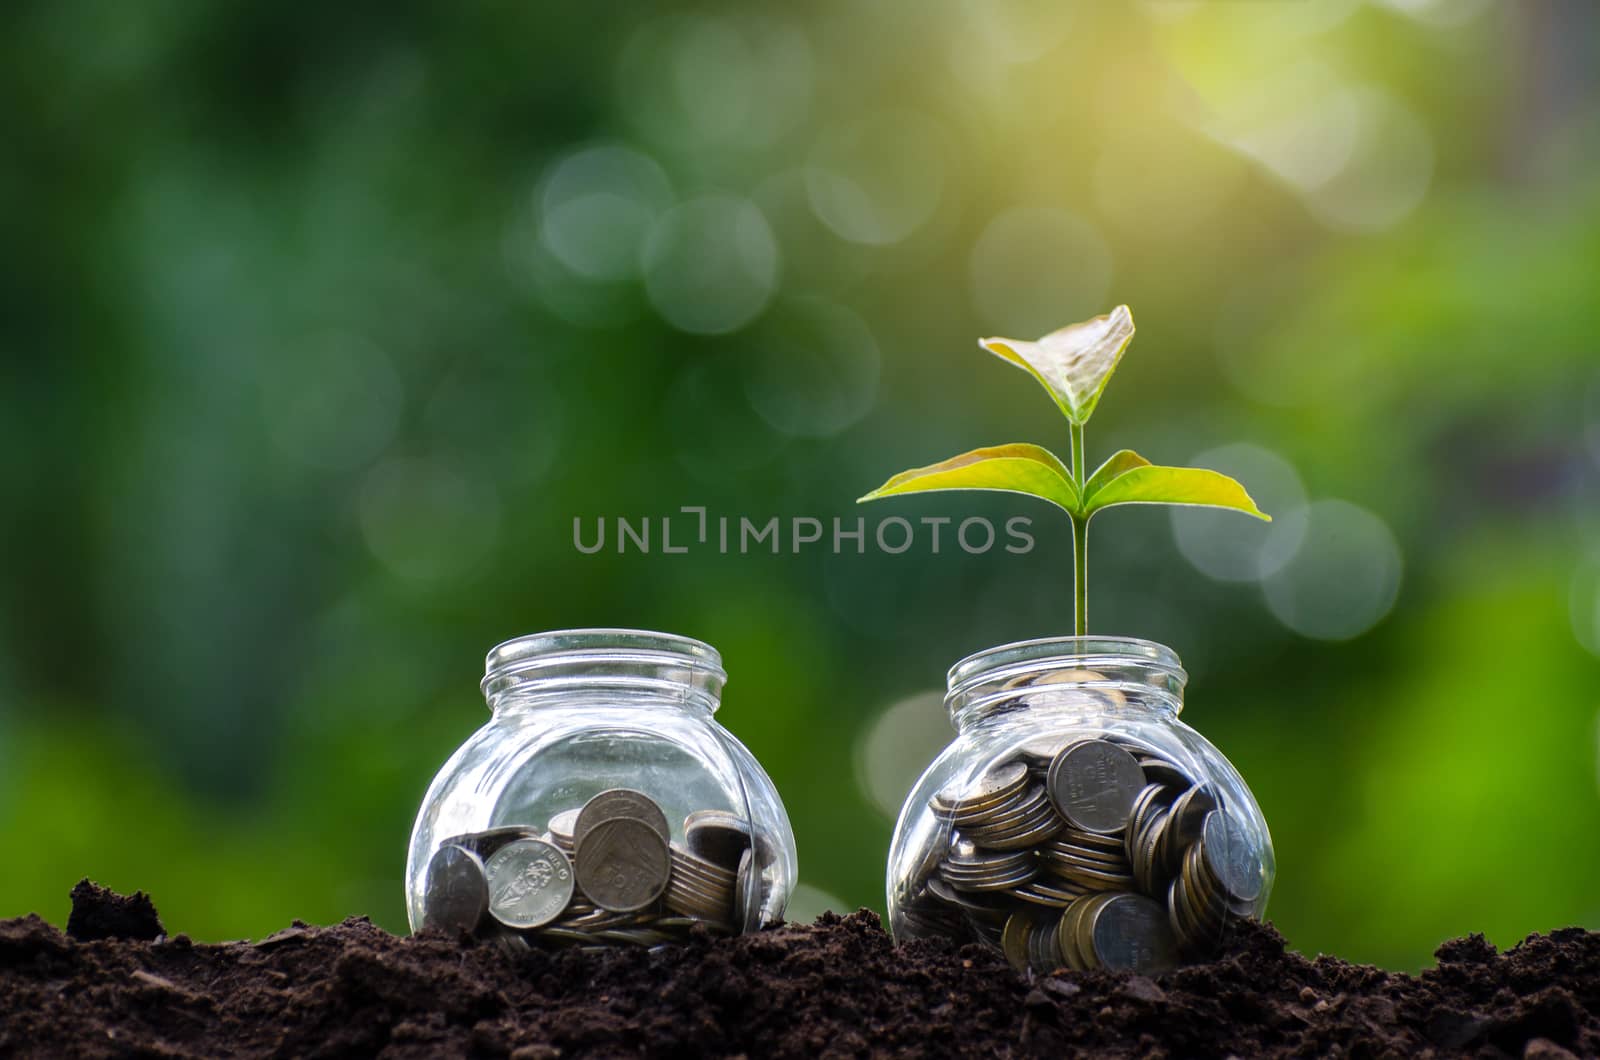 money Bottle Banknotes tree Image of bank note with plant growing on top for business green natural background money saving and investment financial concept